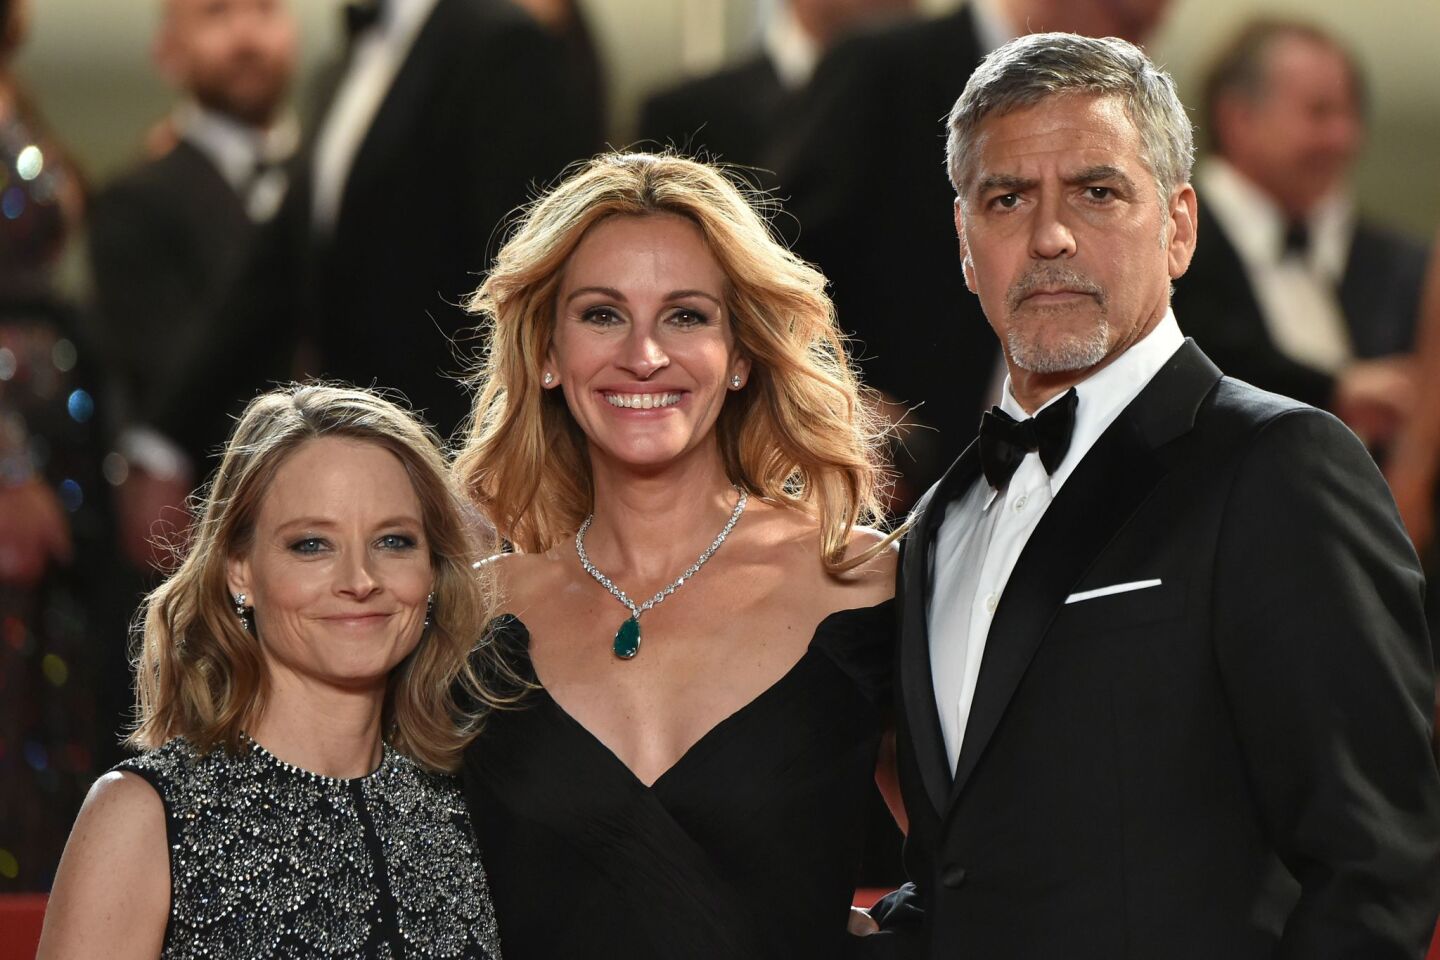 From left: Director Jodie Foster, actress Julia Roberts, and actor George Clooney pose together before leaving the Festival Palace after the screening of their new film"Money Monster" at the Cannes Film Festival on Thursday night.